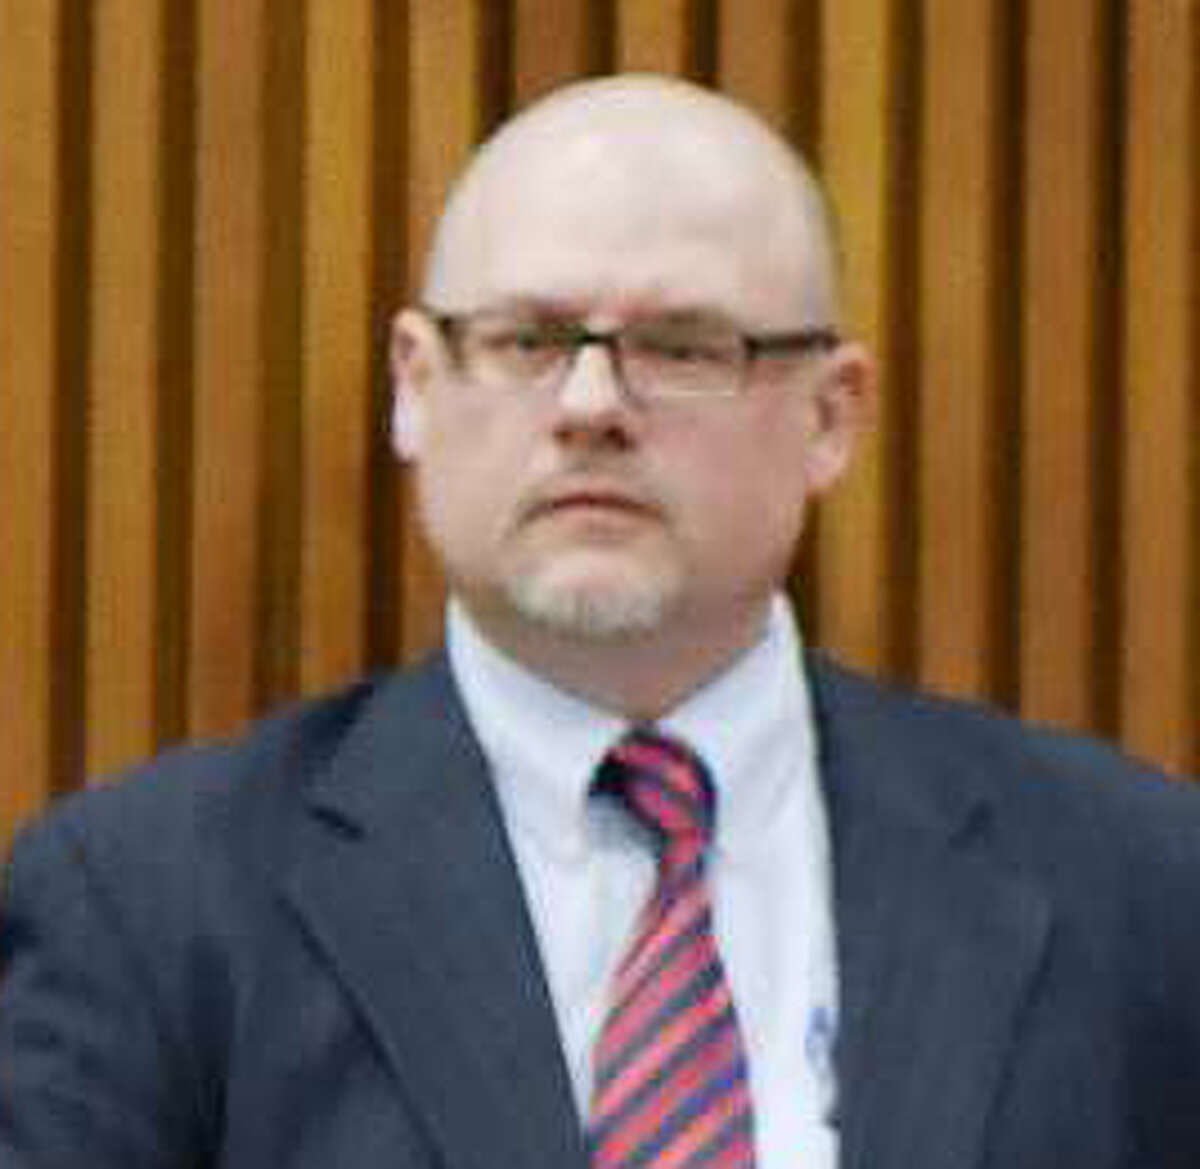 Rodney C. Powis, Sen. Simcha Felder's counsel and chief of staff, stands during the New York State Legislature joint budget hearing on Monday, Jan. 30, 2017, in Albany, N.Y. A female lobbyist has accused Powis of groping and sexually harassing her at a campaign fundraiser last week. (Paul Buckowski/Times Union archive)